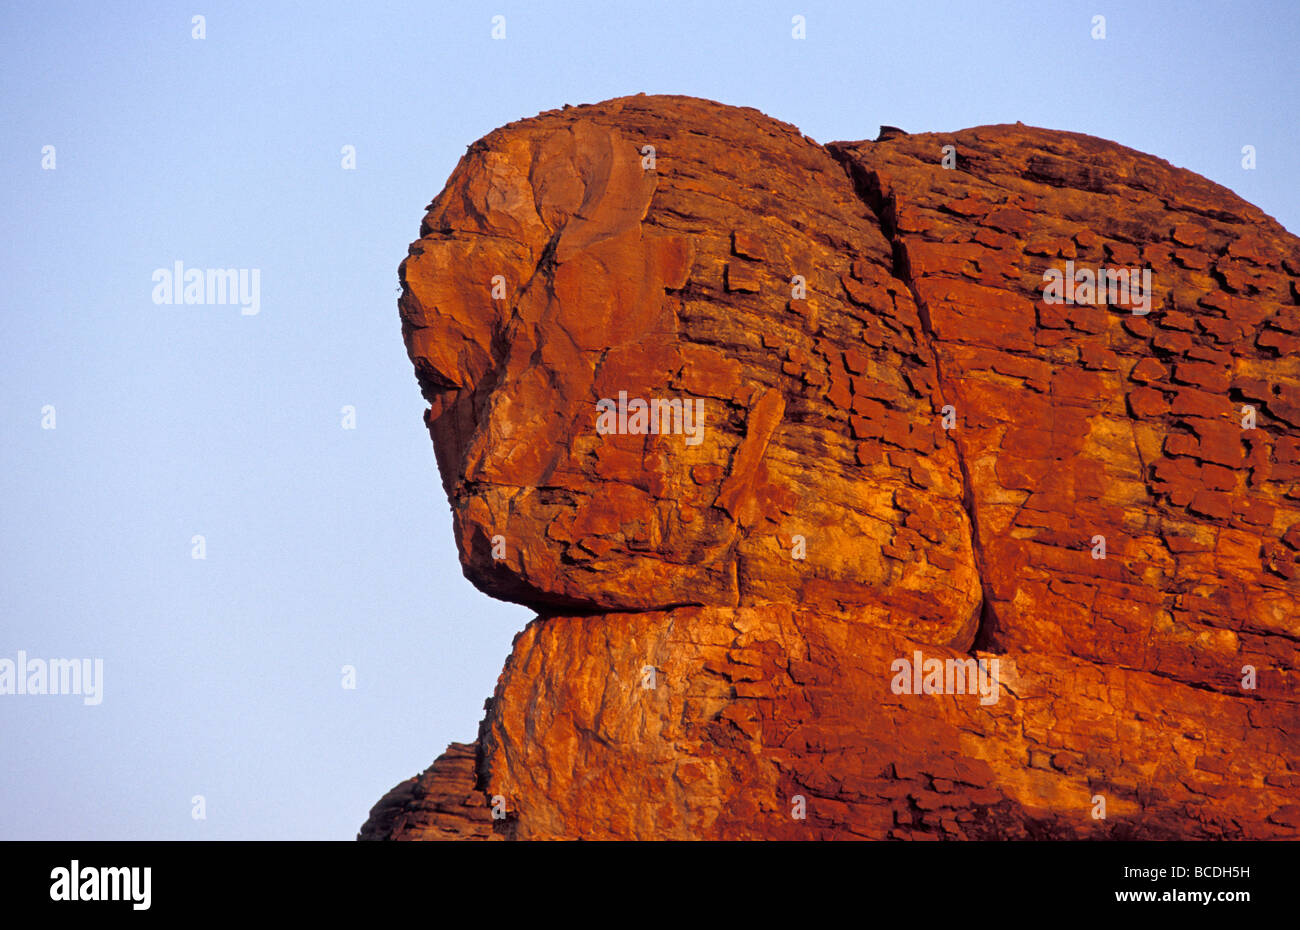 Red rusted cracks on the ancient Lost City sandstone rock formations. Stock Photo